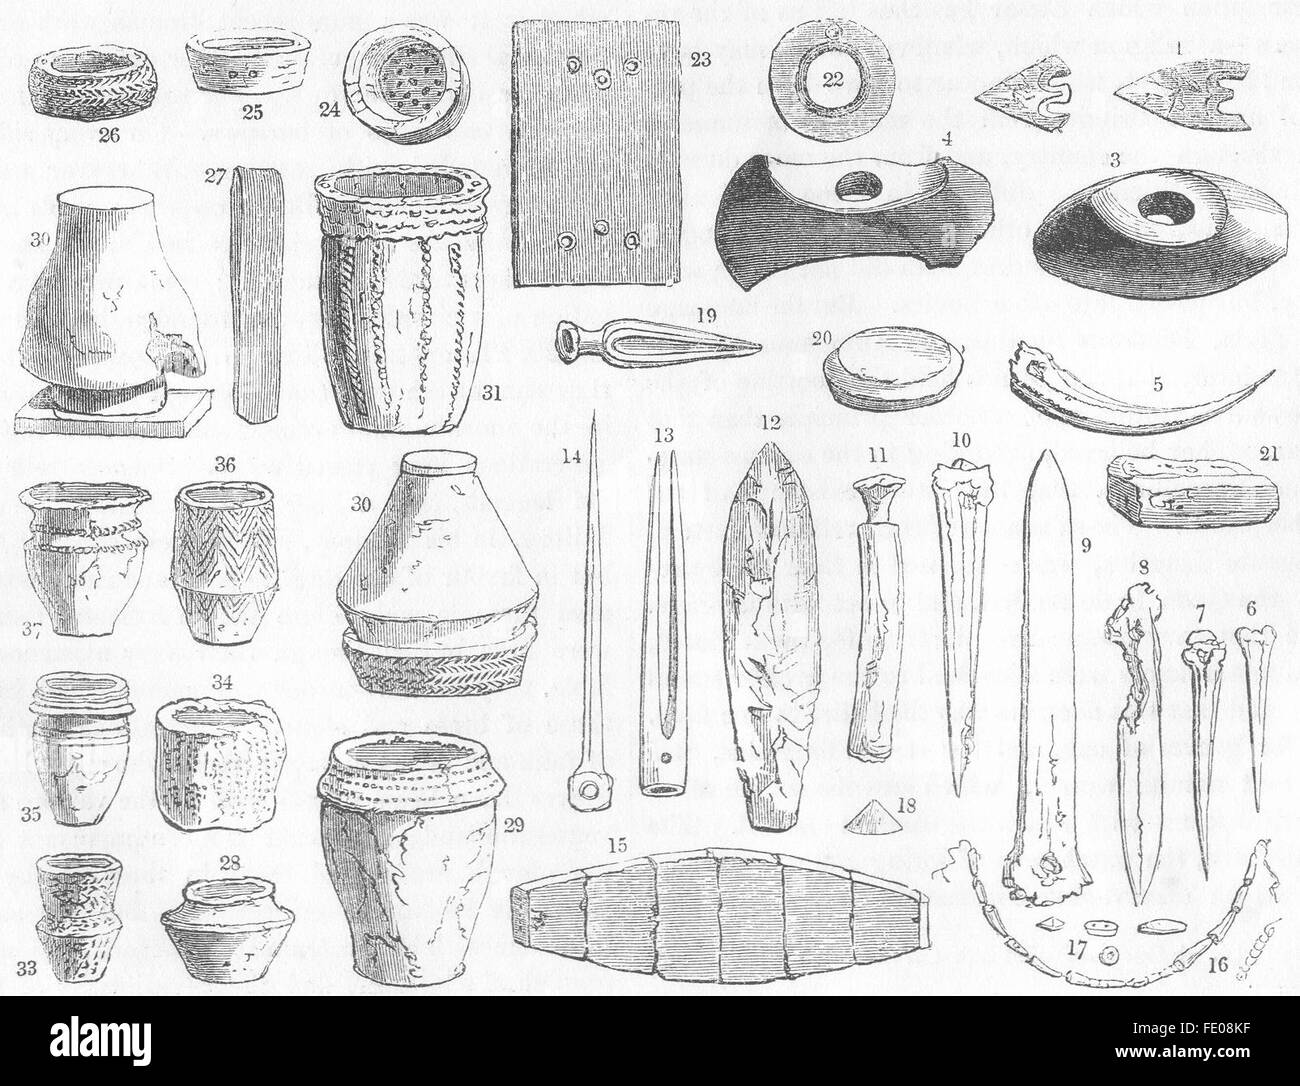 CEMETARIES: Contents of British Barrows, antique print 1845 Stock Photo